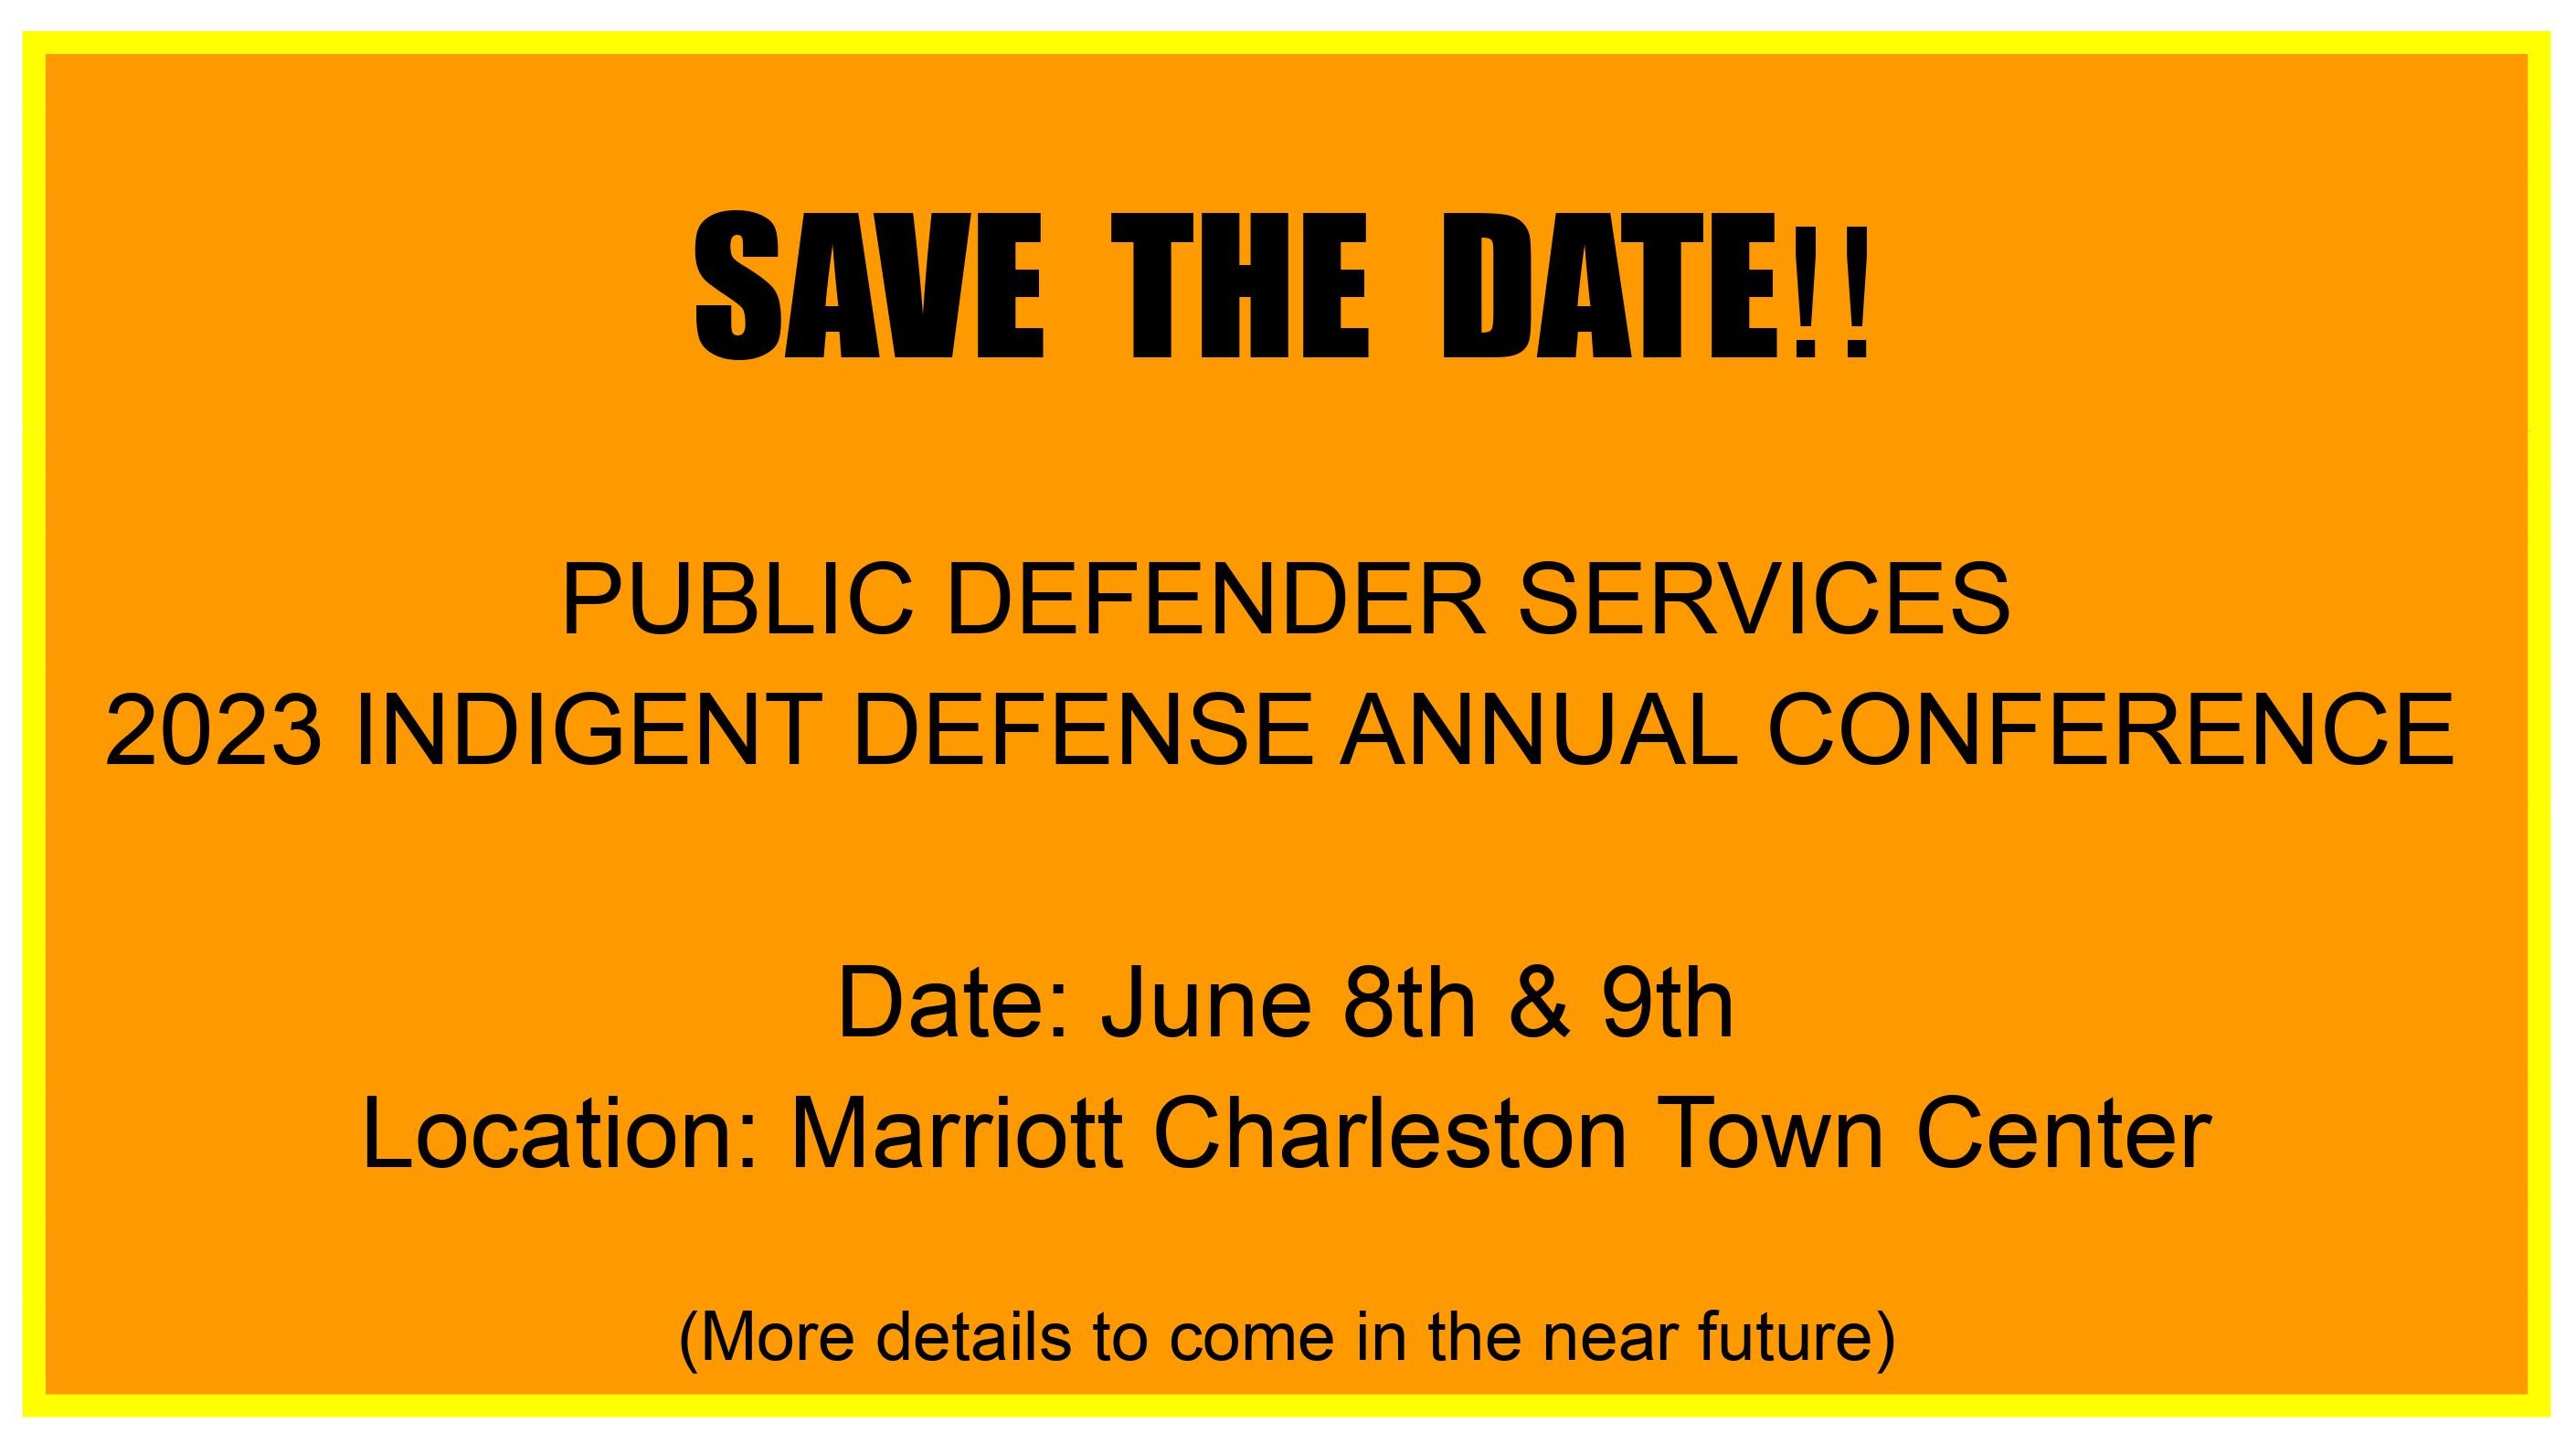 Annual Conference 2023 SAVE THE DATE